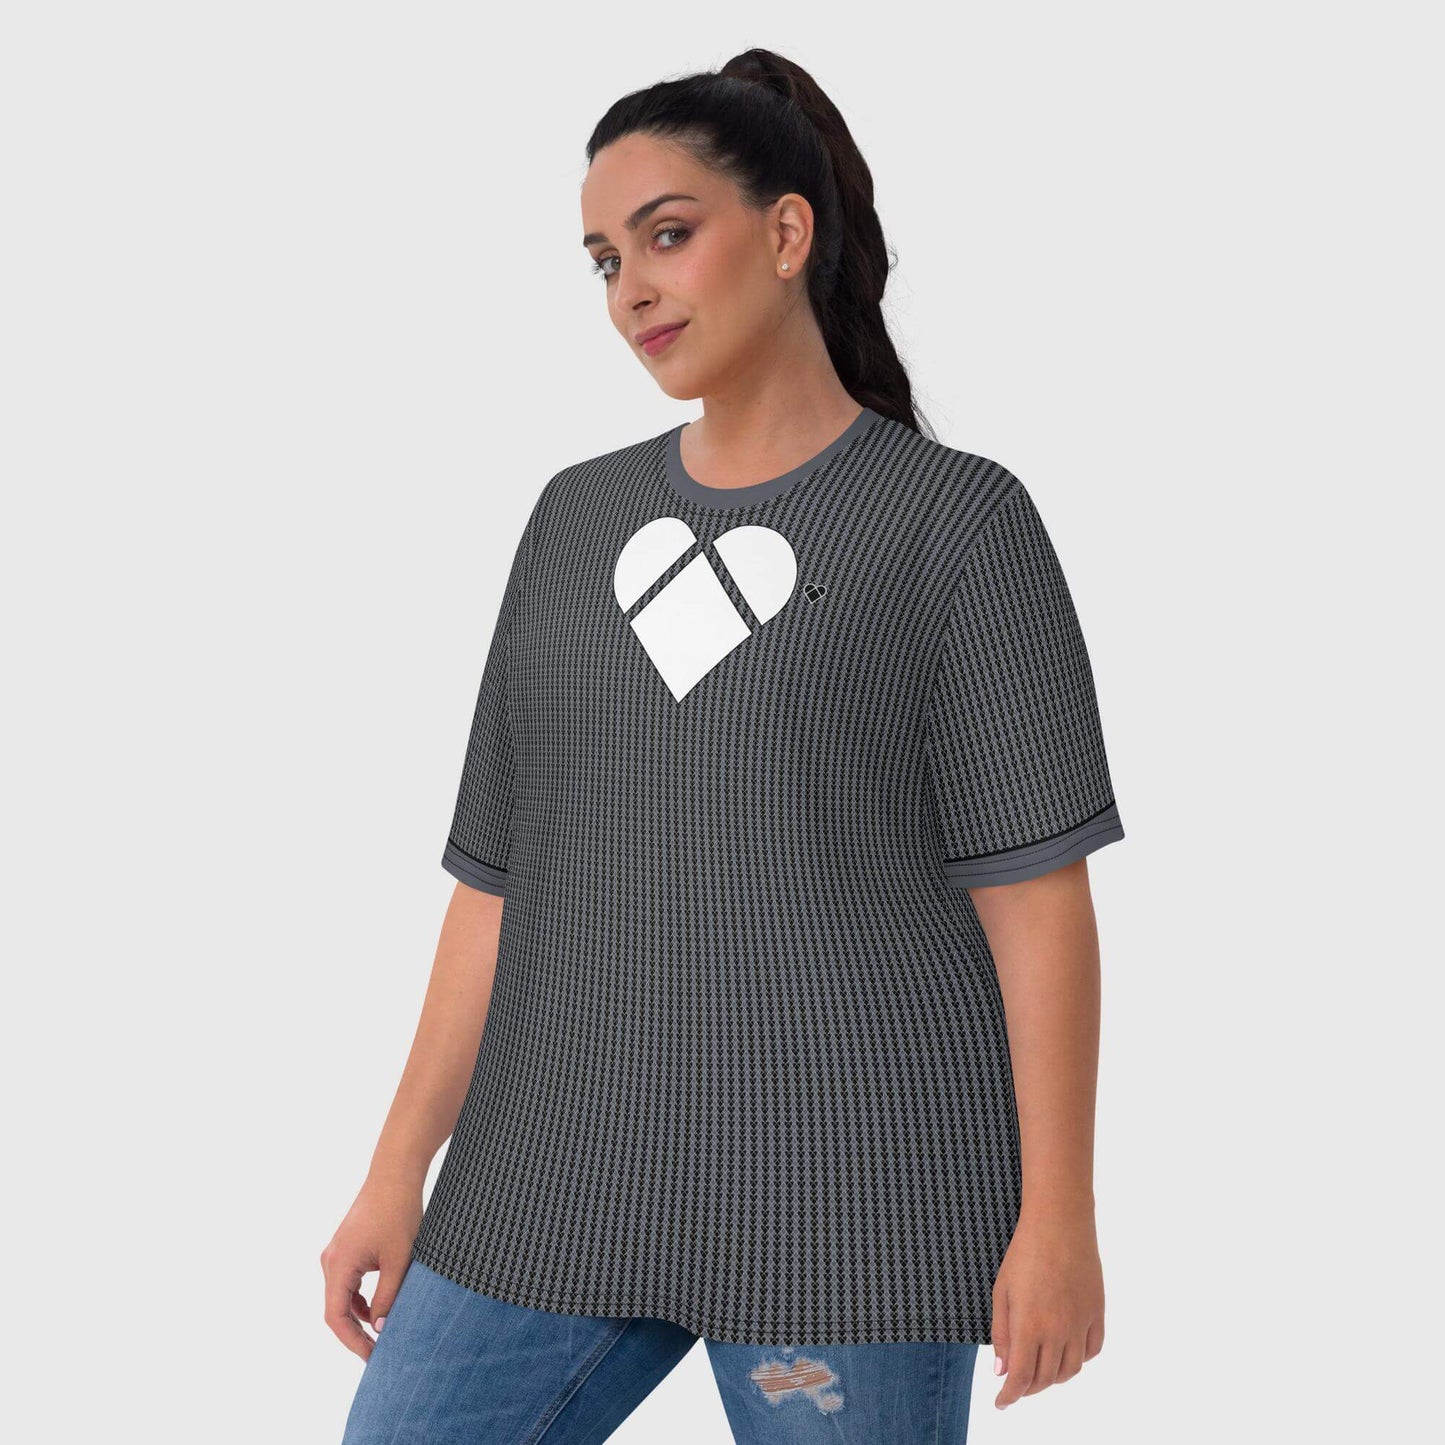 Black Lovogram Shirt with a Dual-shade heart pattern, promoting self-love and confidence. female model